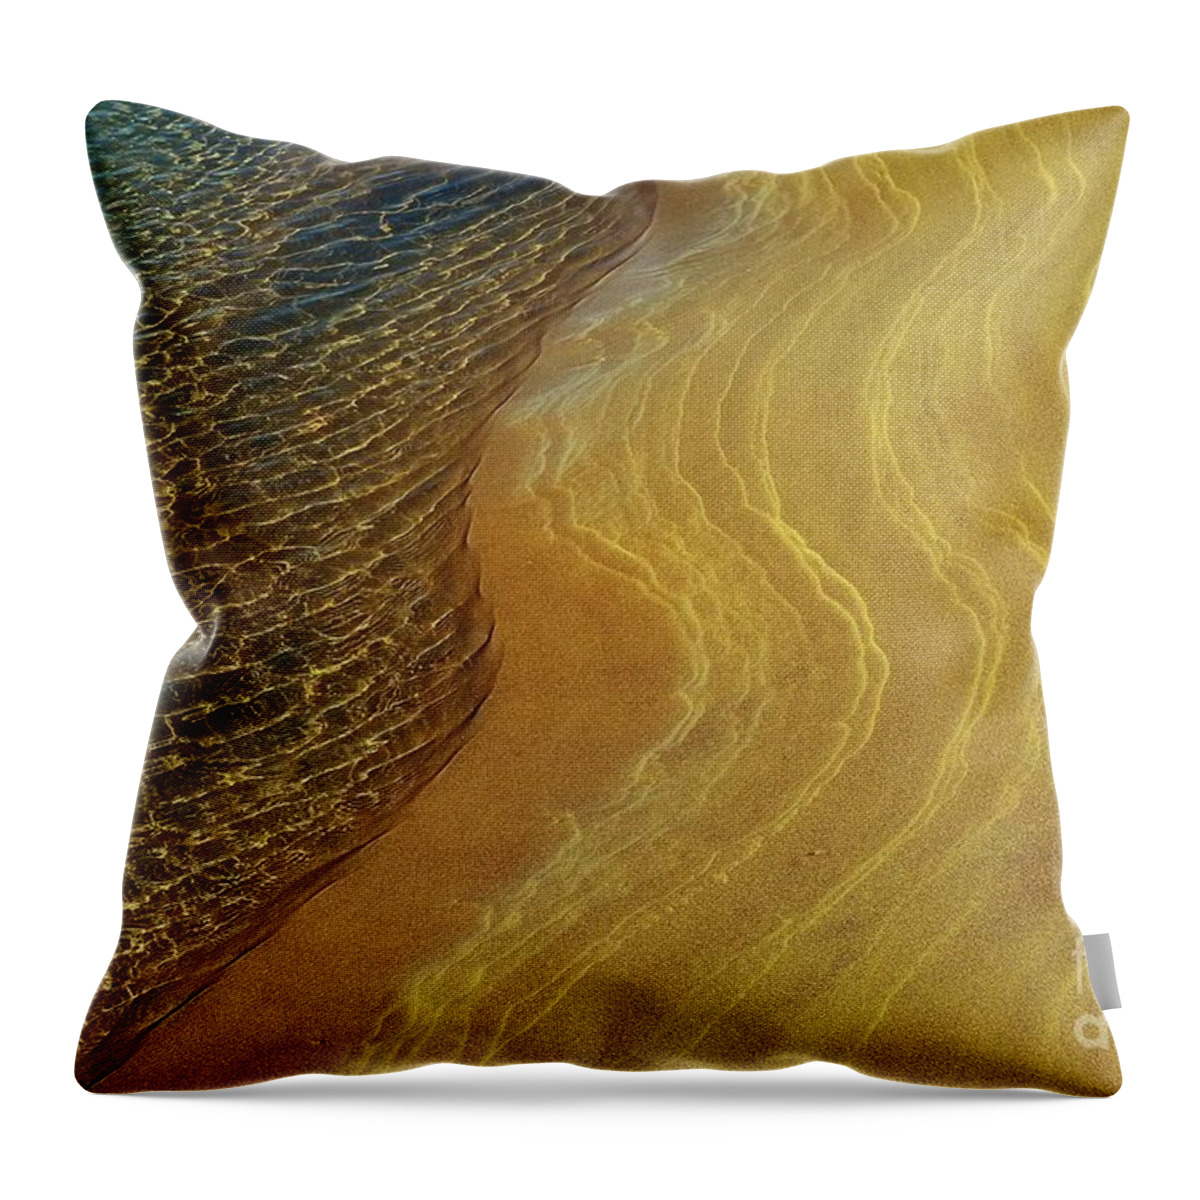 Water Throw Pillow featuring the photograph Current by Lauren Leigh Hunter Fine Art Photography